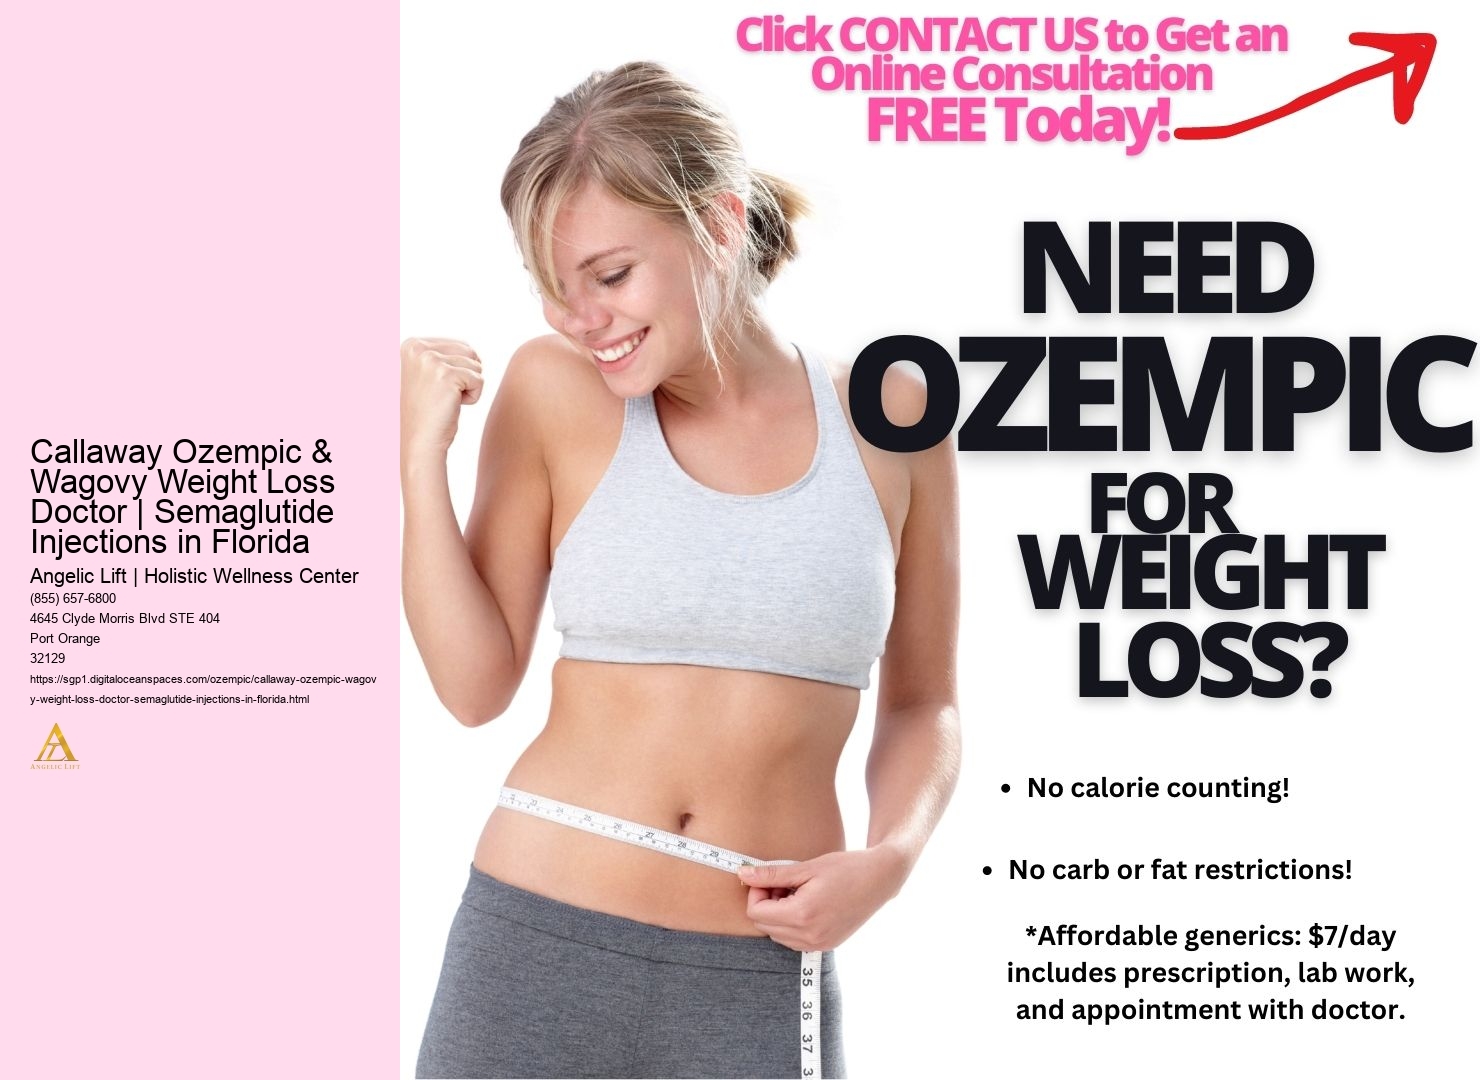 Callaway Ozempic & Wagovy Weight Loss Doctor | Semaglutide Injections in Florida